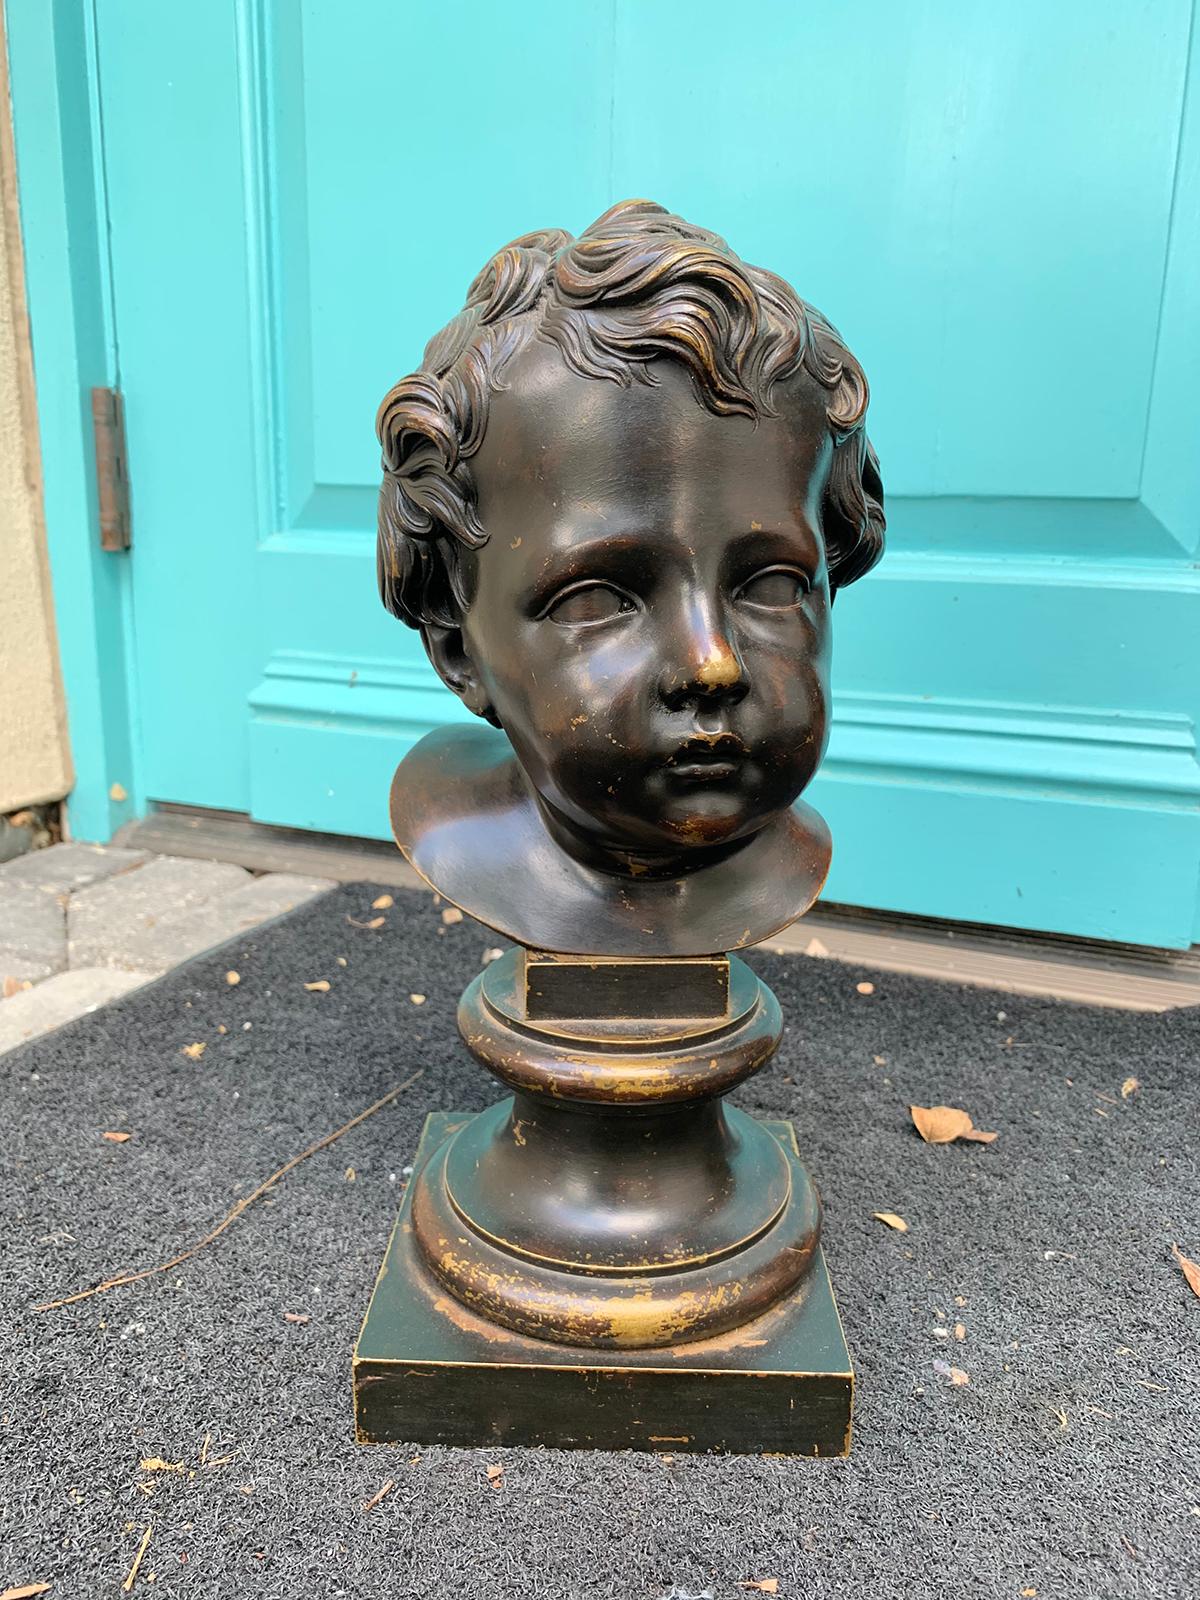 19th-20th century French bronze bust of young boy.